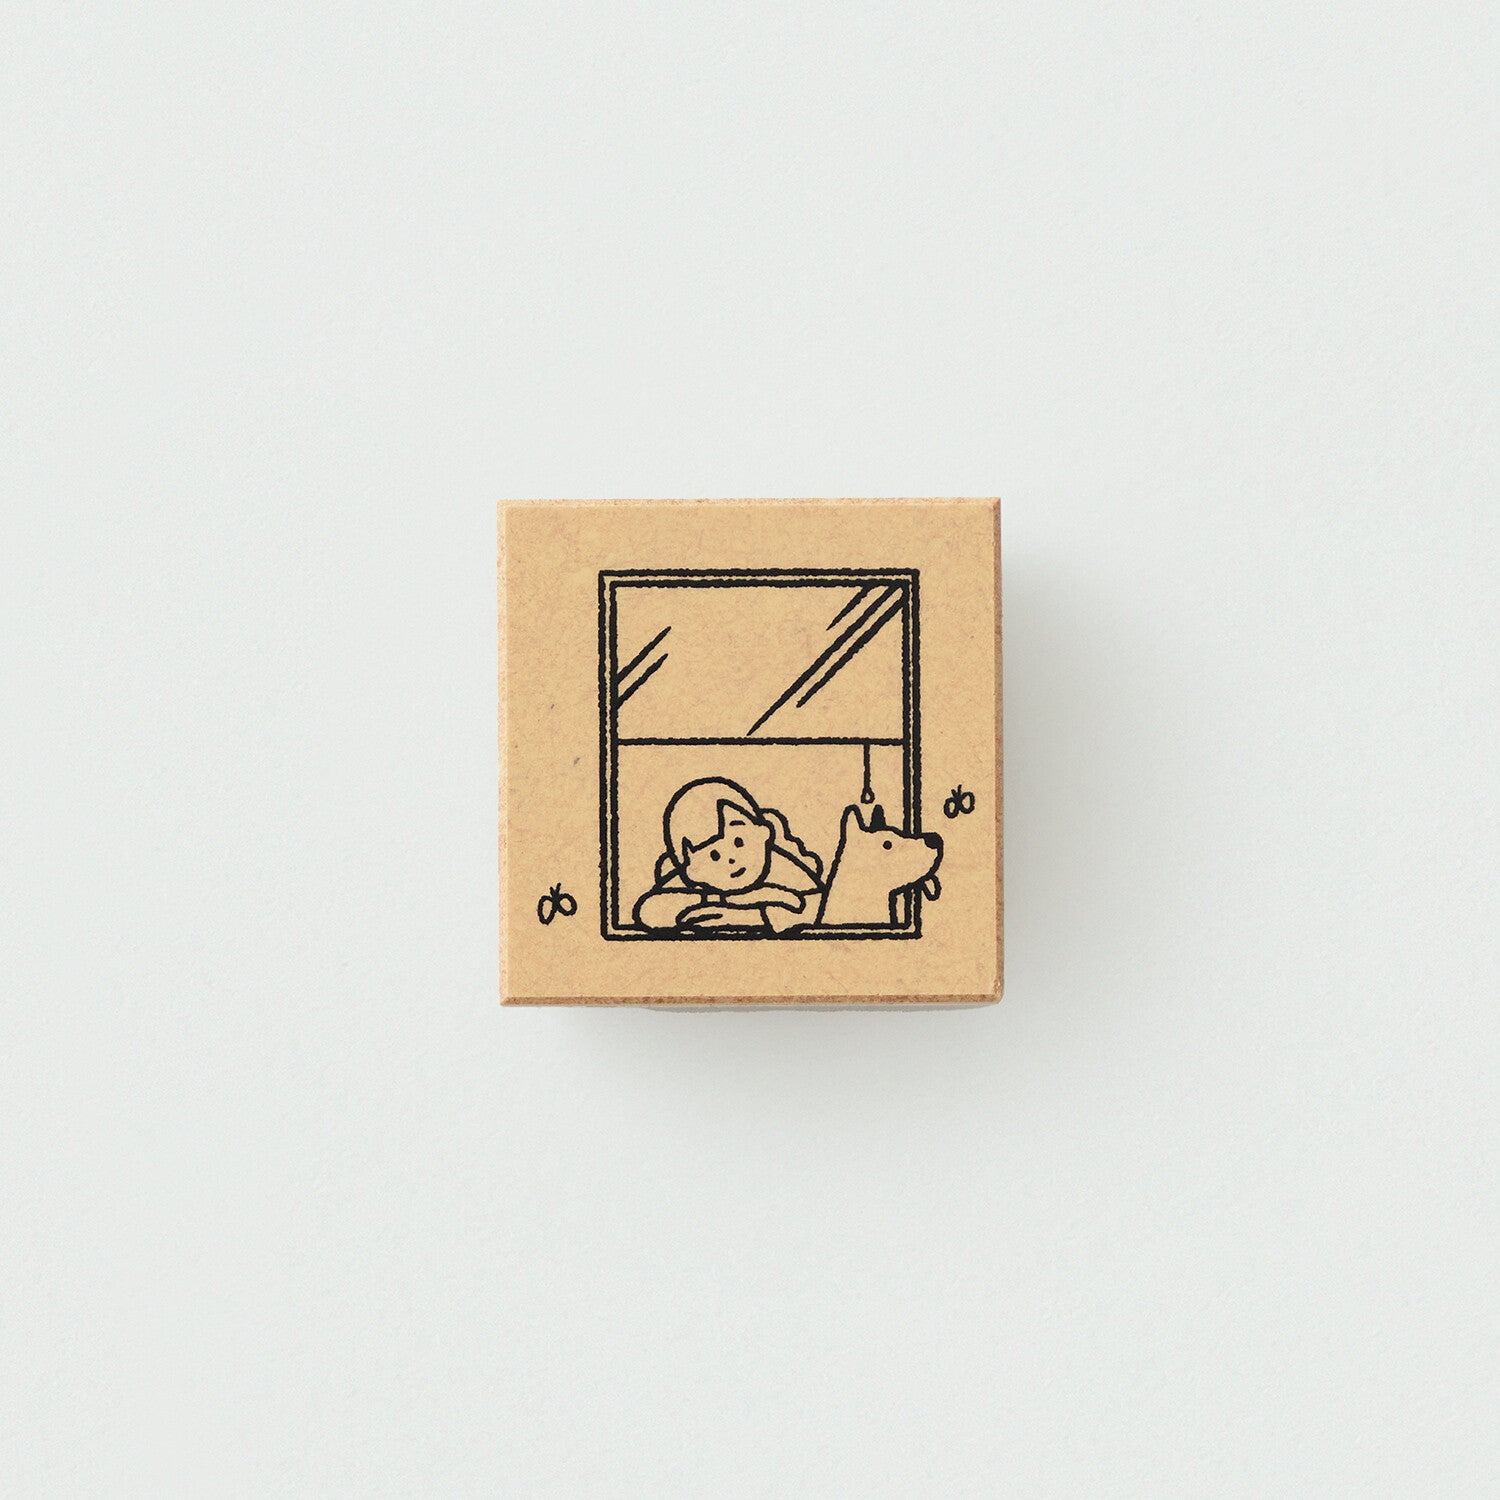 Sankakeru Currently on Vacation Rubber Stamp - View outside Window - Techo Treats